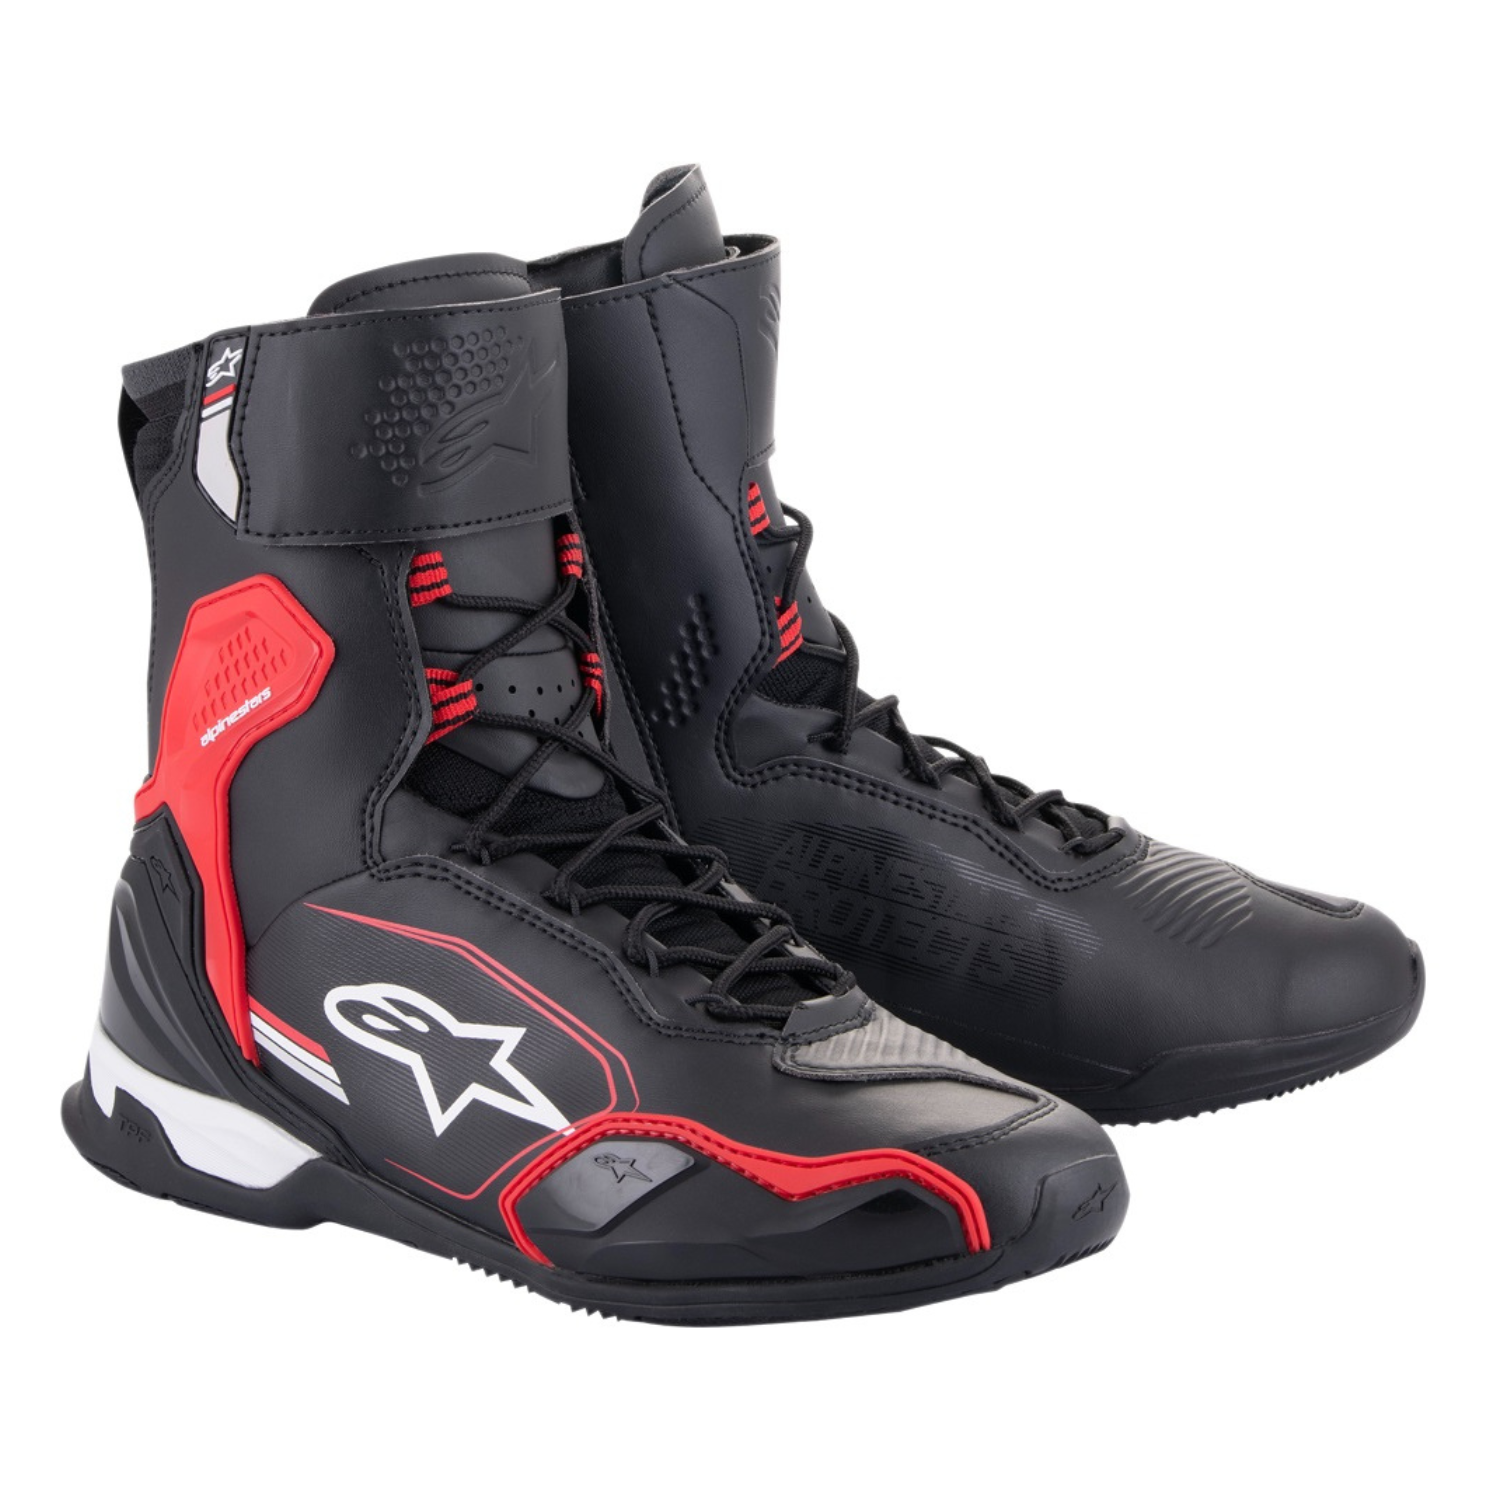 Image of Alpinestars Superfaster Shoes Black Bright Red White Size US 125 ID 8059347261027